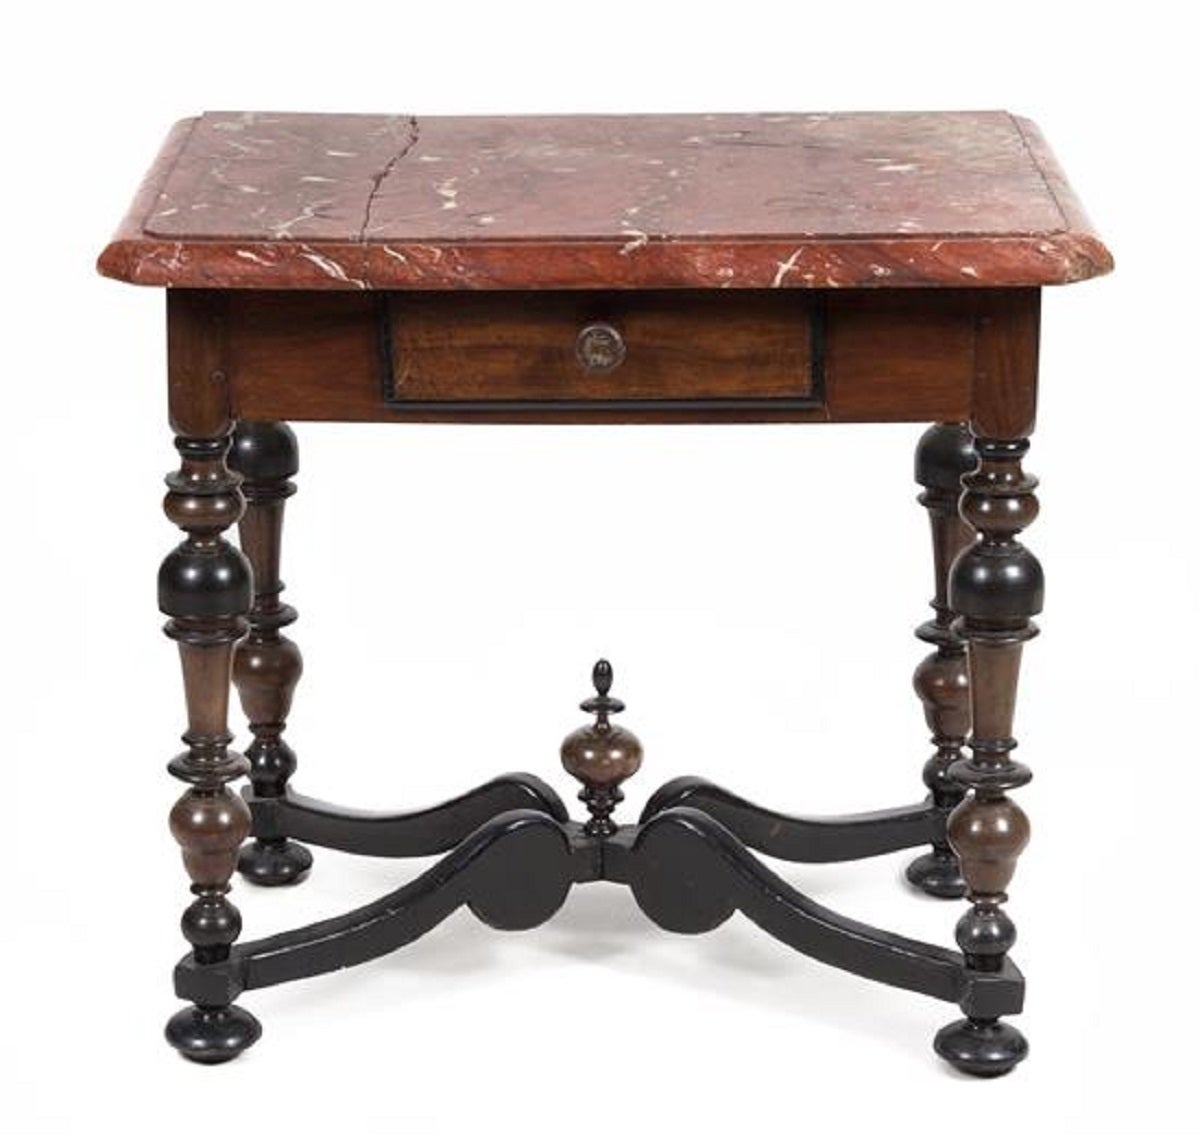 A Portuguese Walnut Side Table having a rectangular marble top over a single frieze drawer, raised on turned legs joined by an X-form stretcher, Early 18th Century